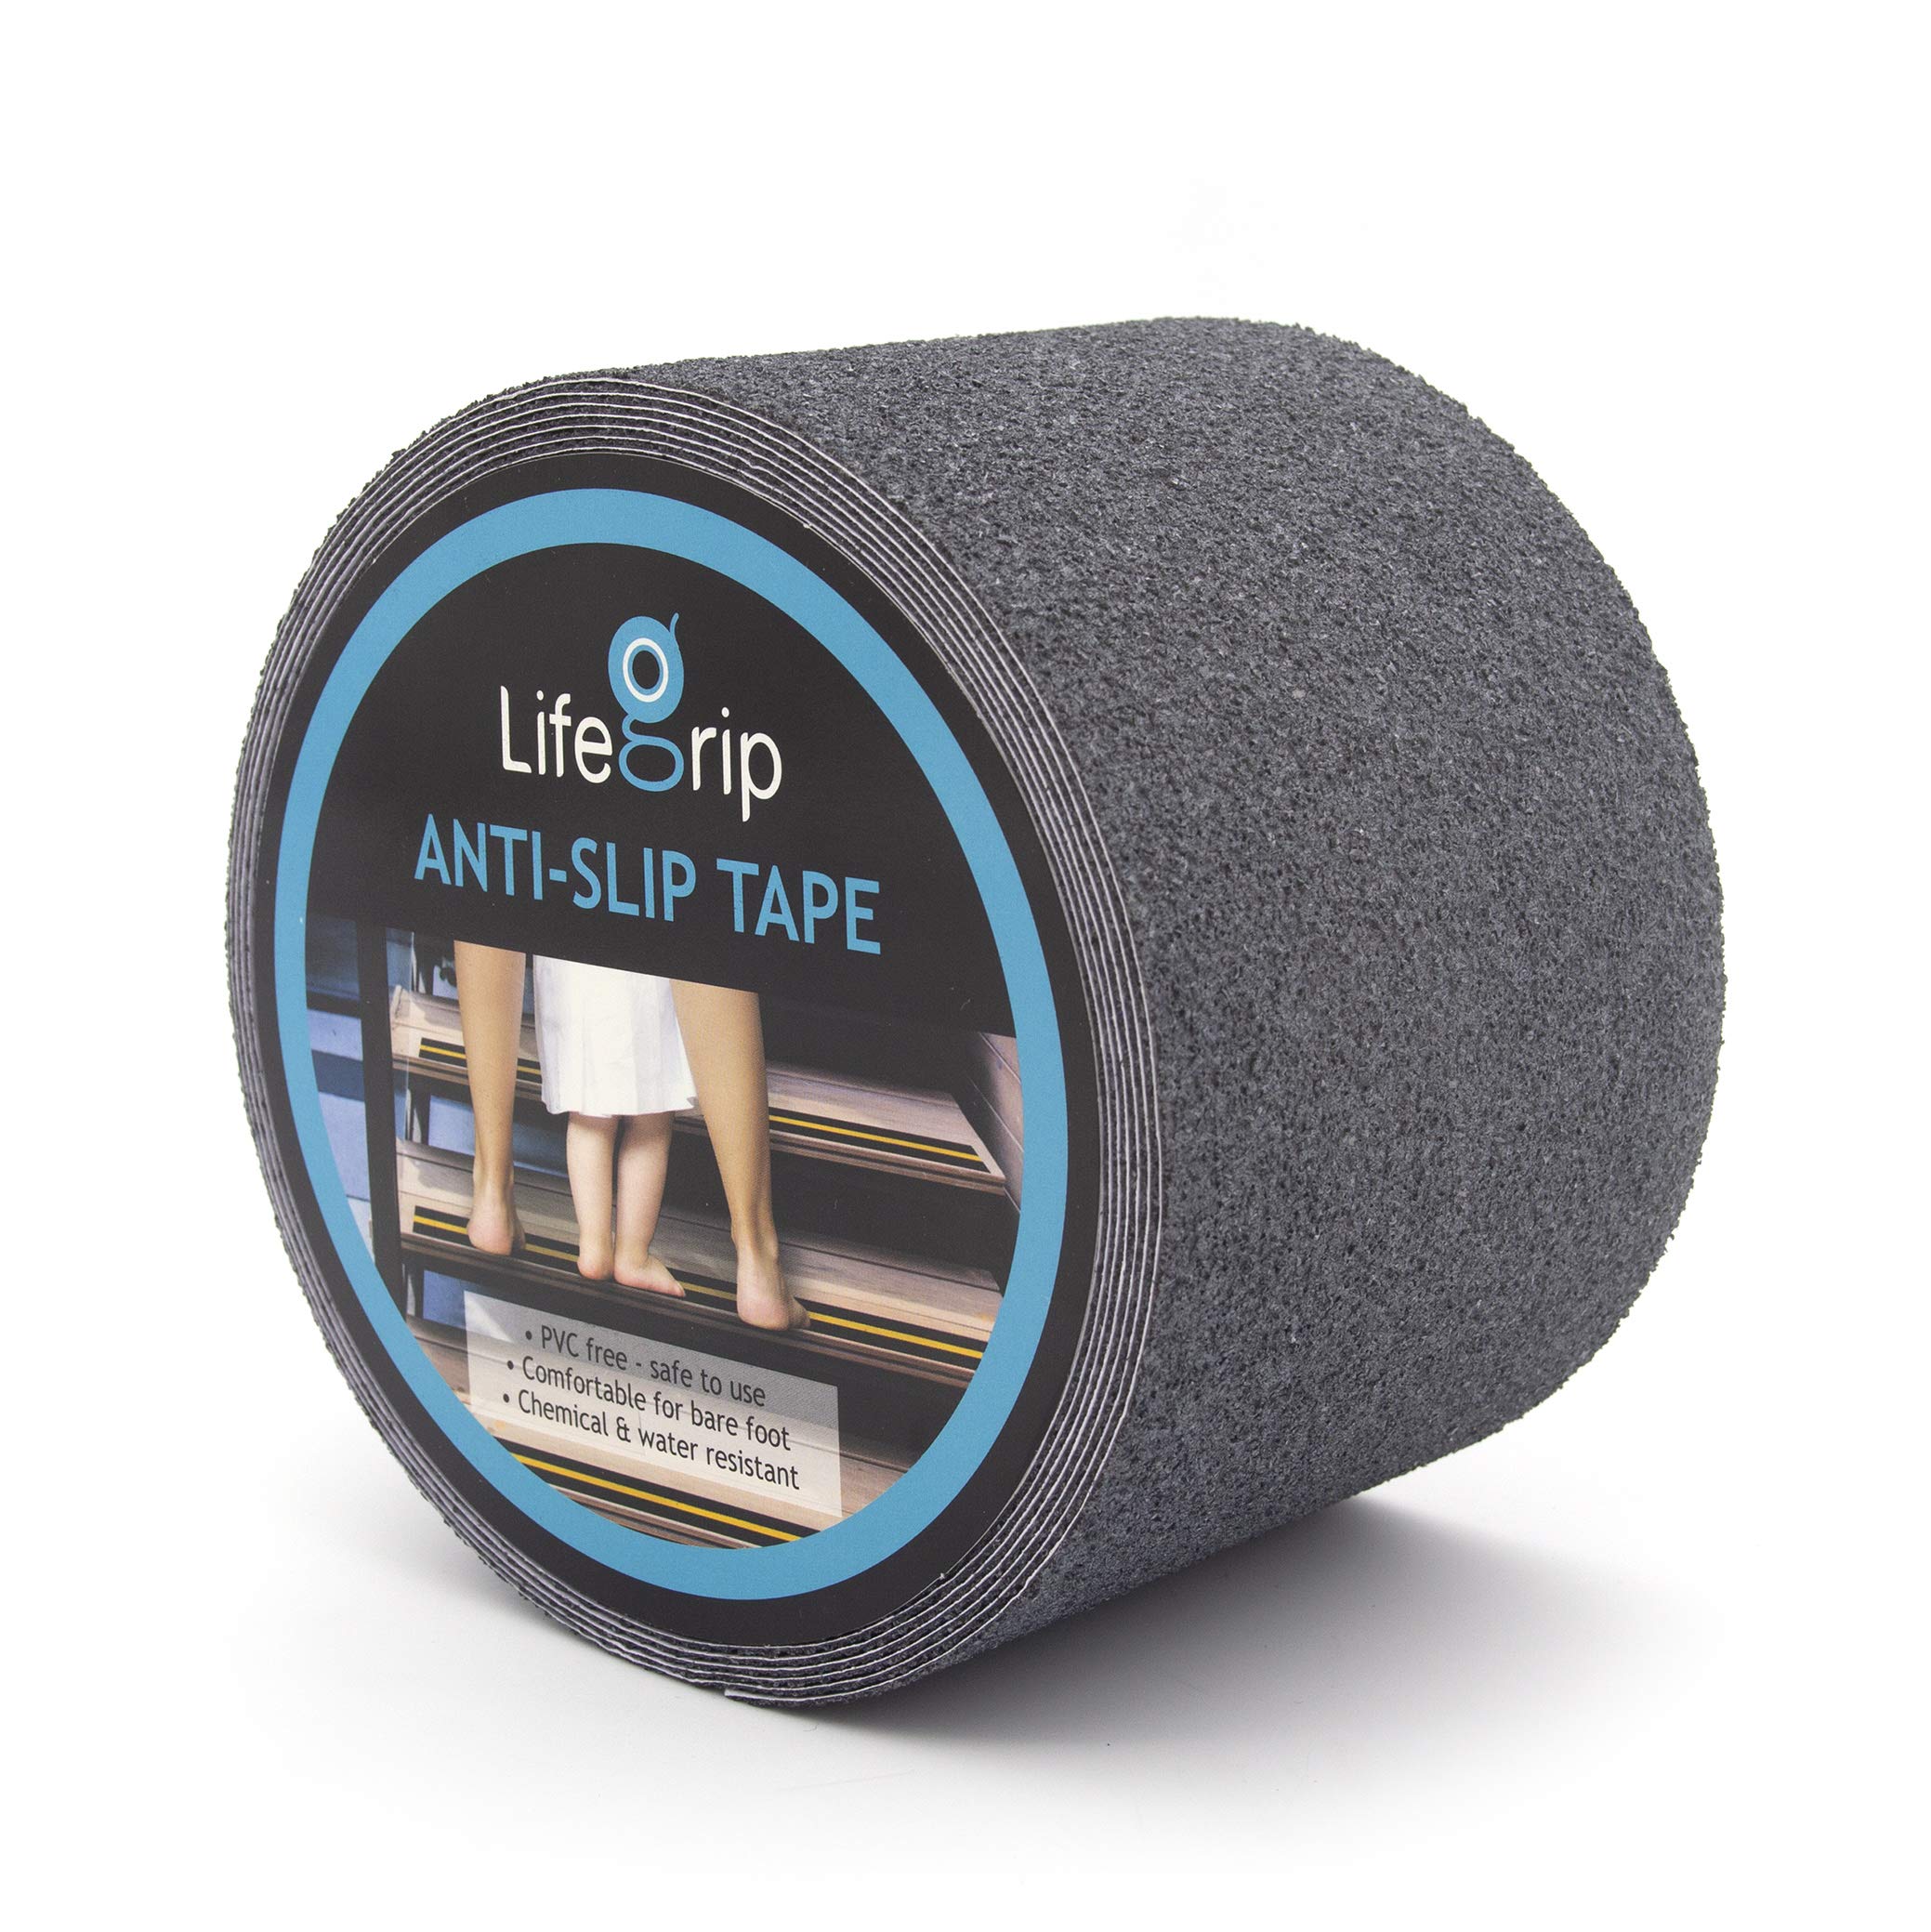 LifeGrip Stay on Track LifeGrip Anti Slip Safety Tape, Non Slip Stair Tread, Textured Rubber Surface, Comfortable for Barefoot, 4 inch X 30 Foot, Grey